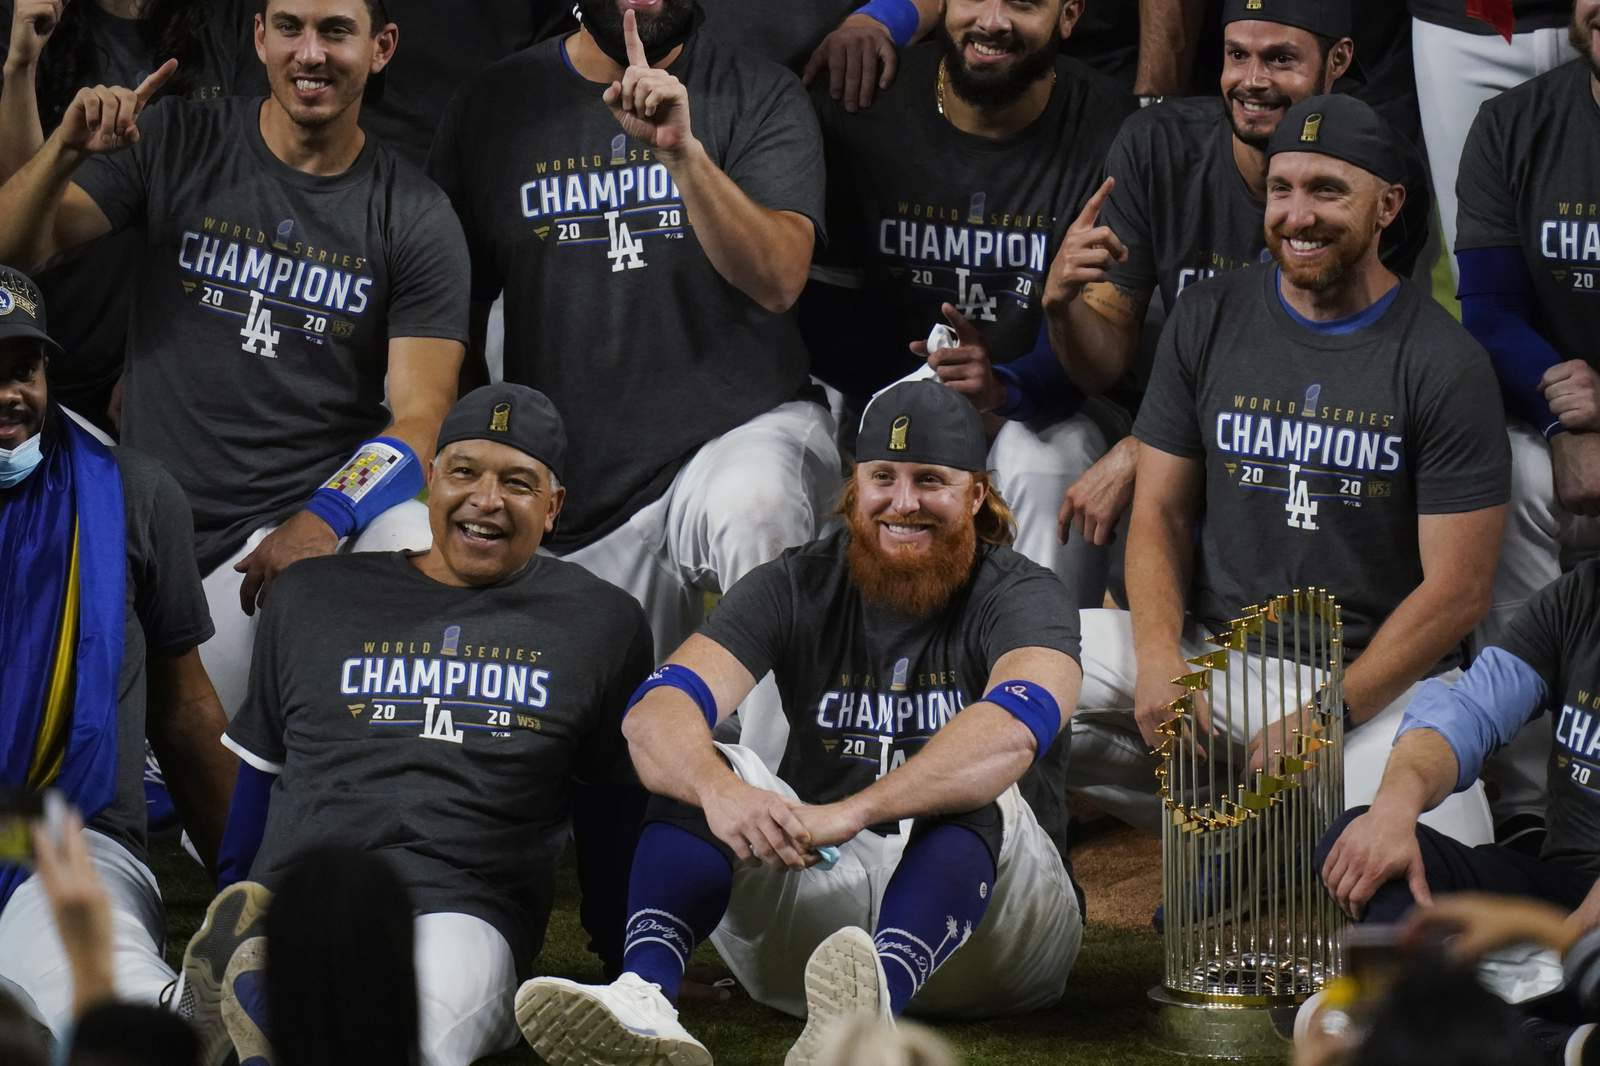 Fitting finale: Dodgers win title, Turner tests positive